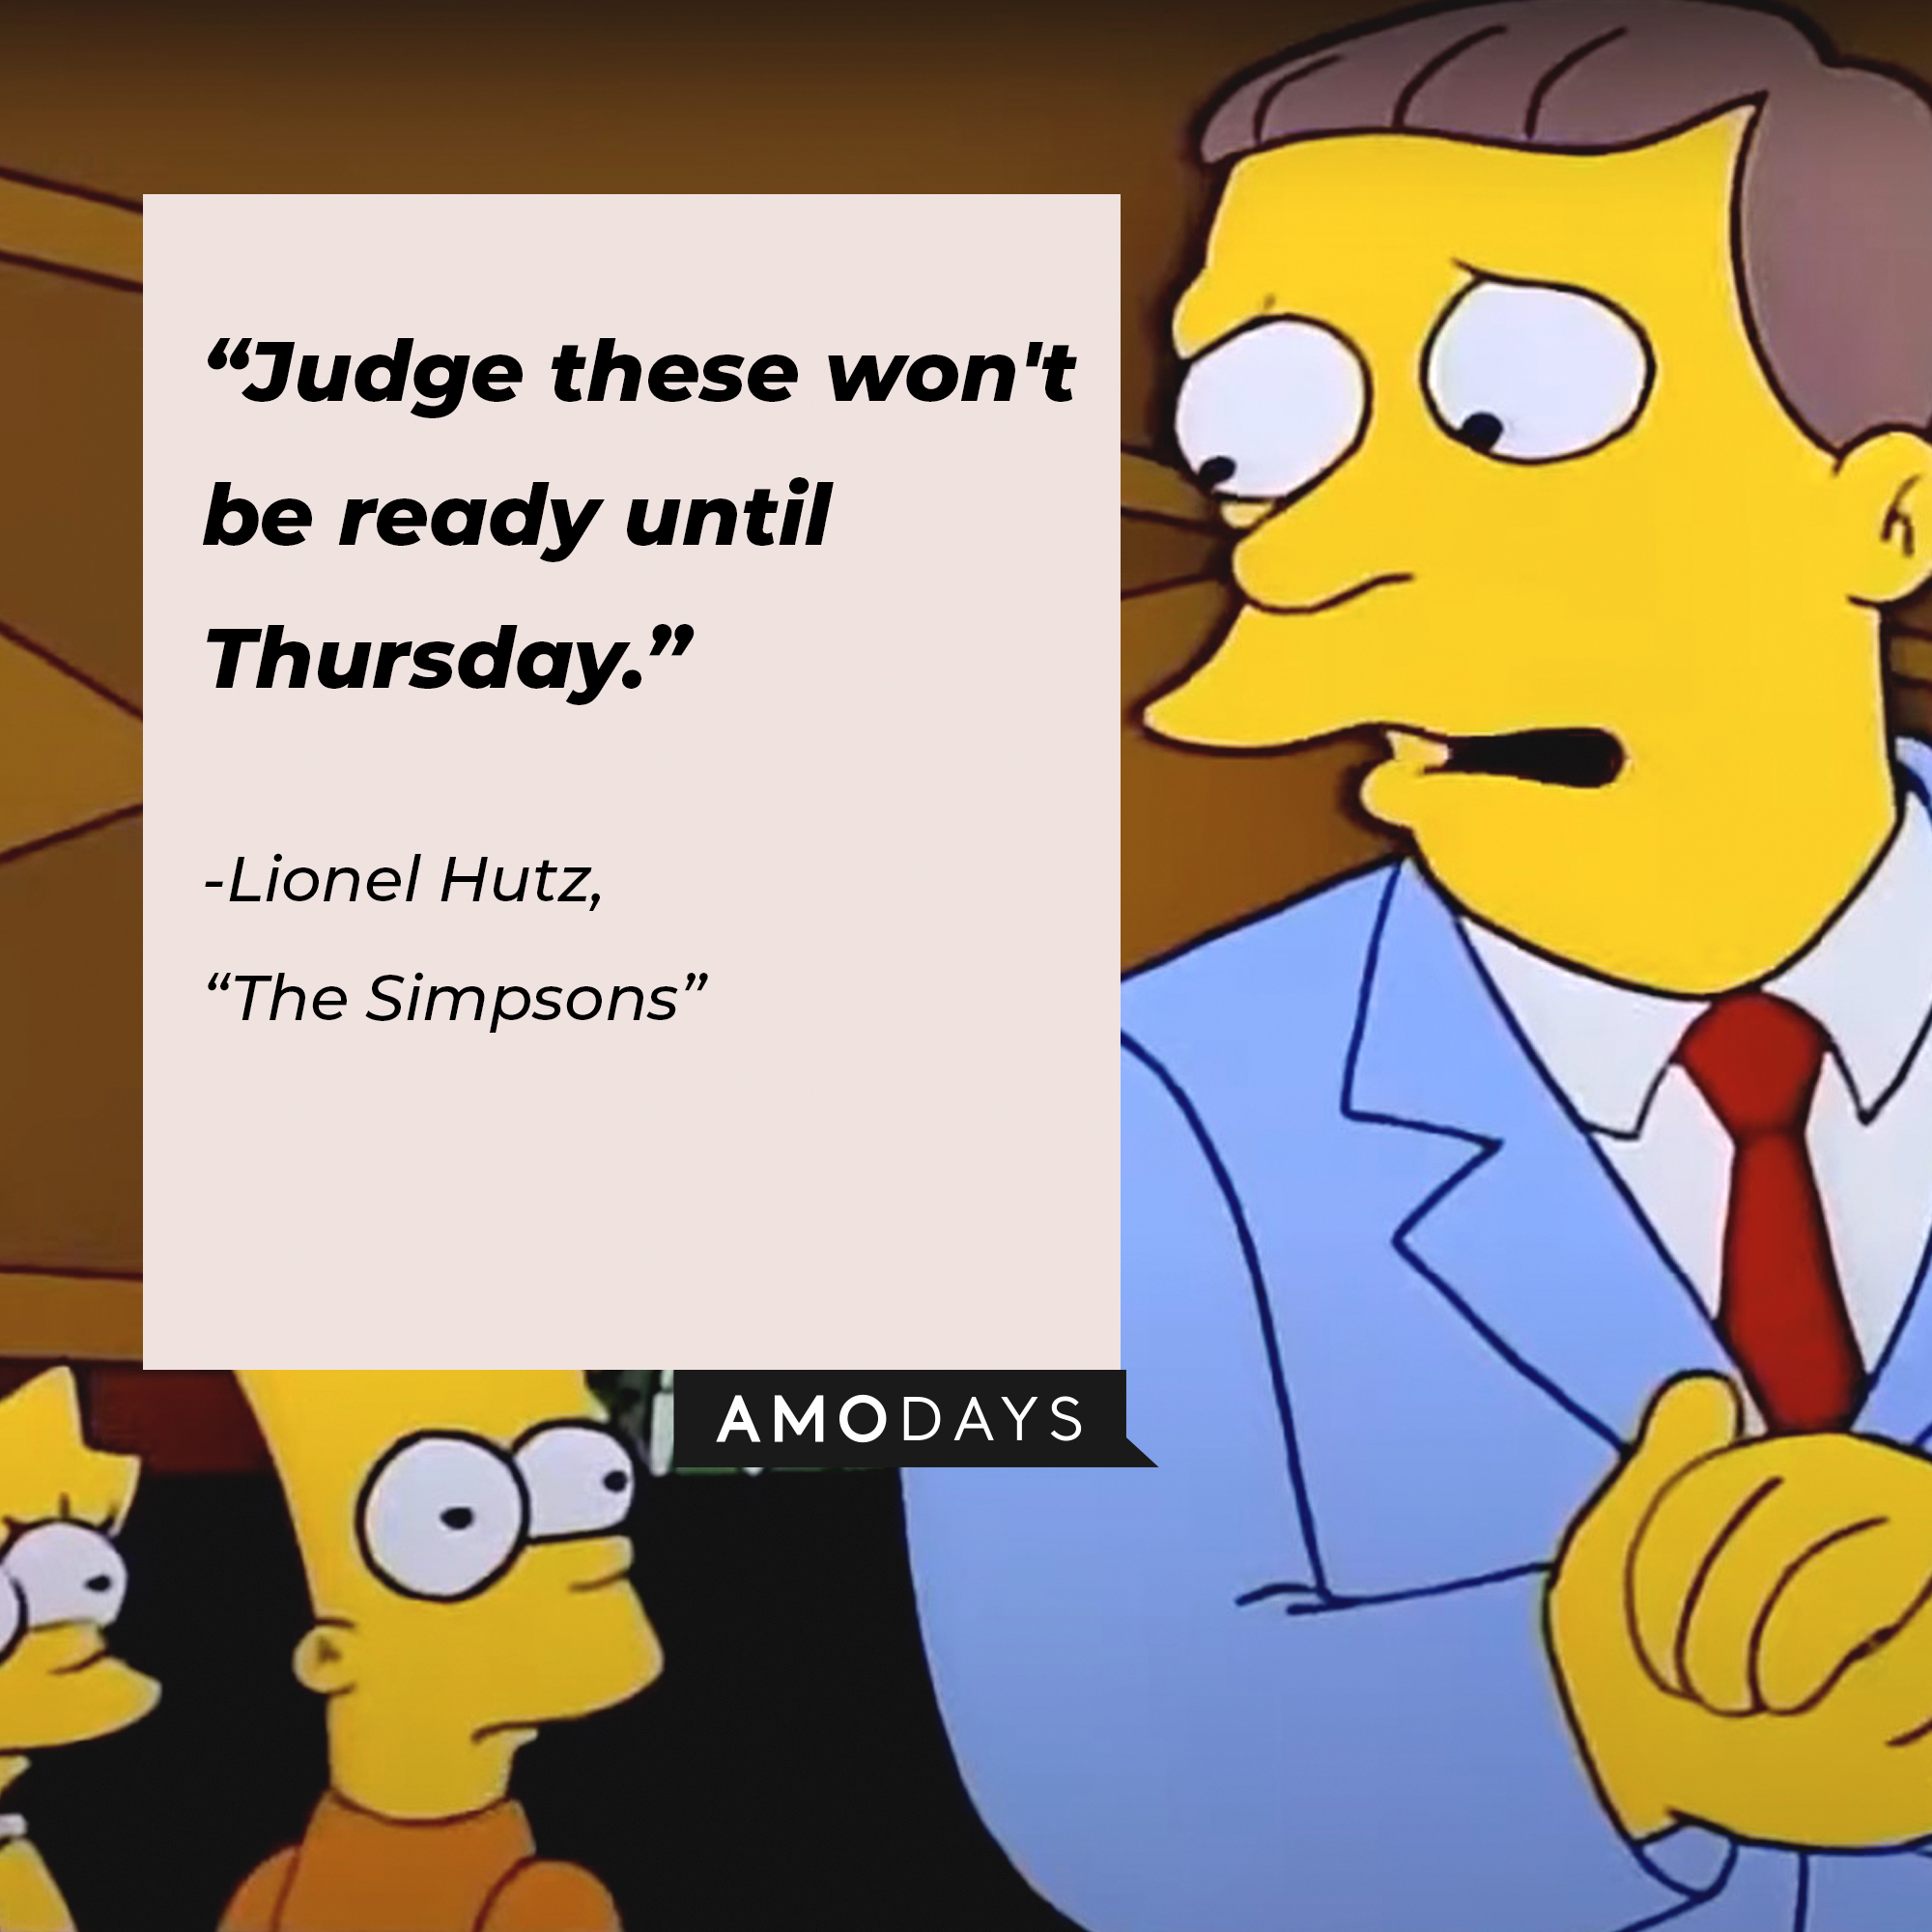 Lionel Hutz’s quote from “The Simpsons”: “Judge these won't be ready until Thursday.” | Source: facebook.com/TheSimpsons